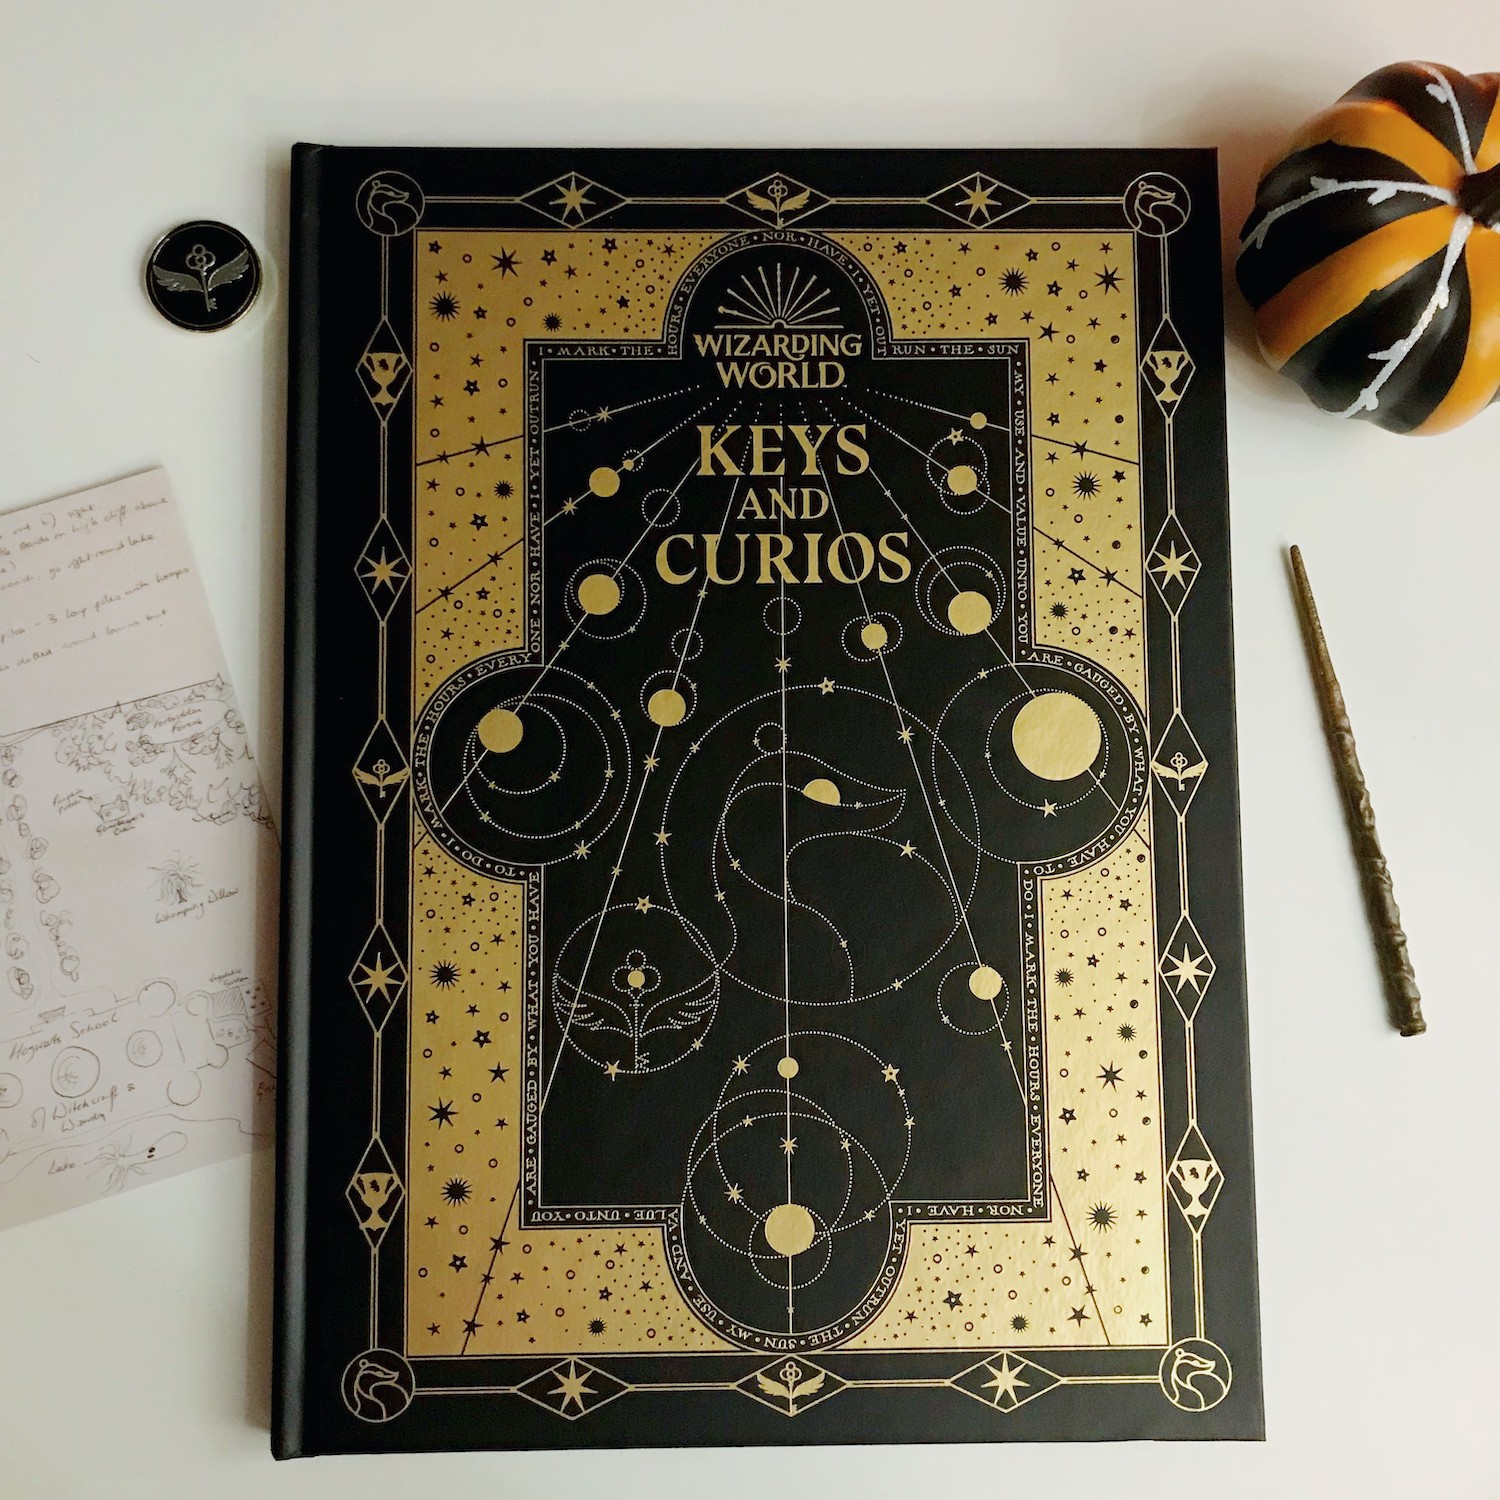 The Keys and Curios journal comes with a winged key magnetic pin and an original sketch by J.K. Rowling. You’ll have to supply your own wand and pumpkin!